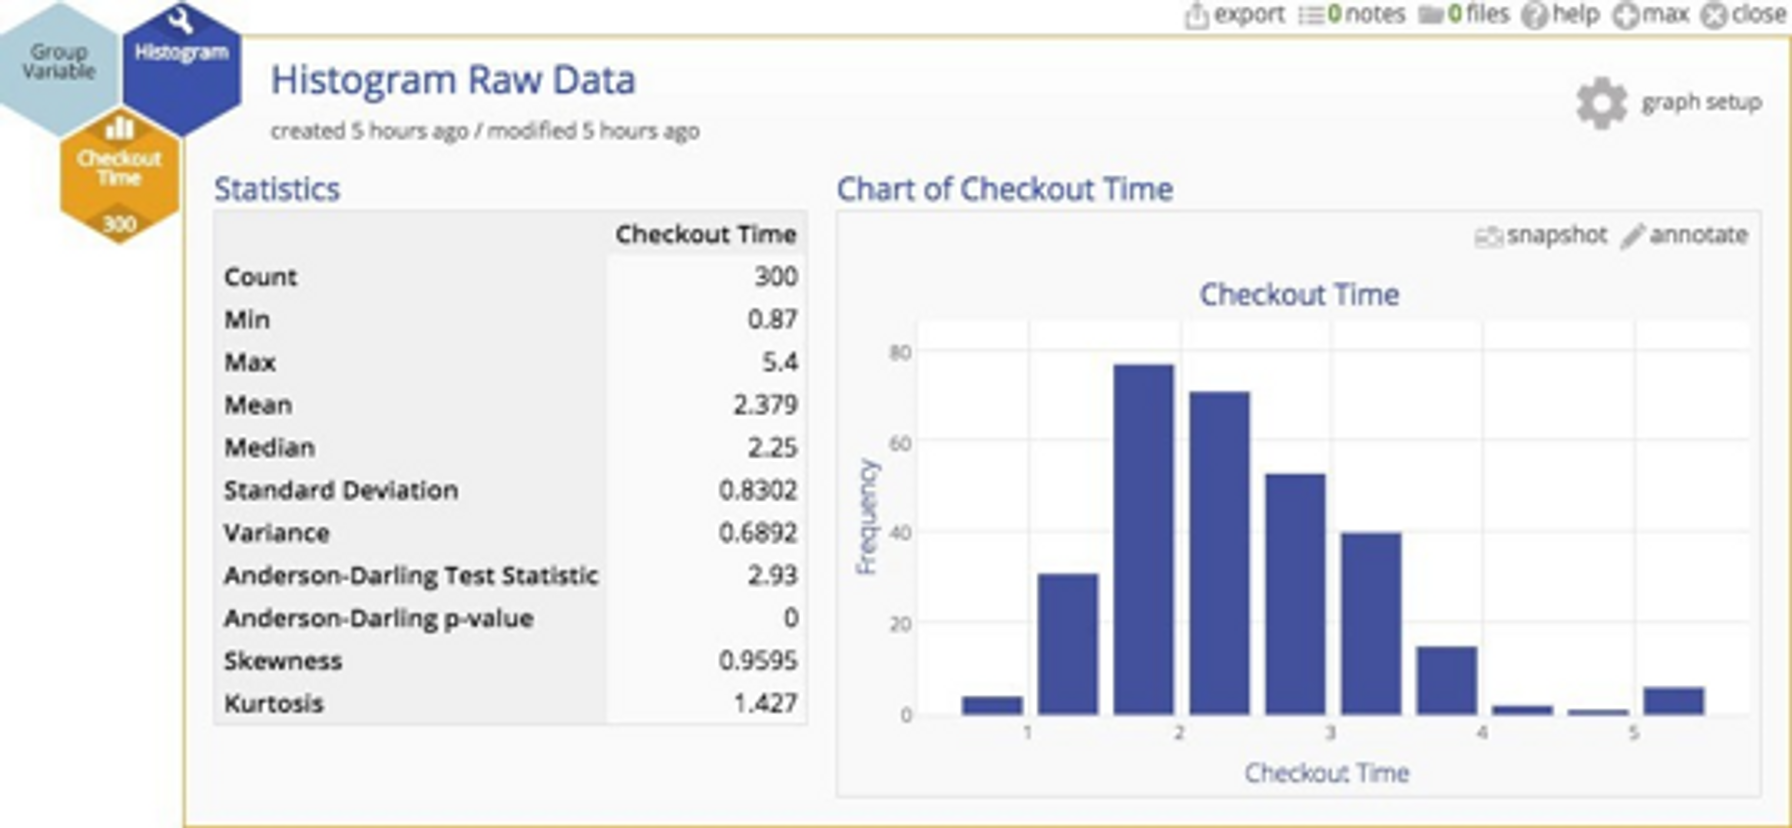 Histogram with skewed checkout time